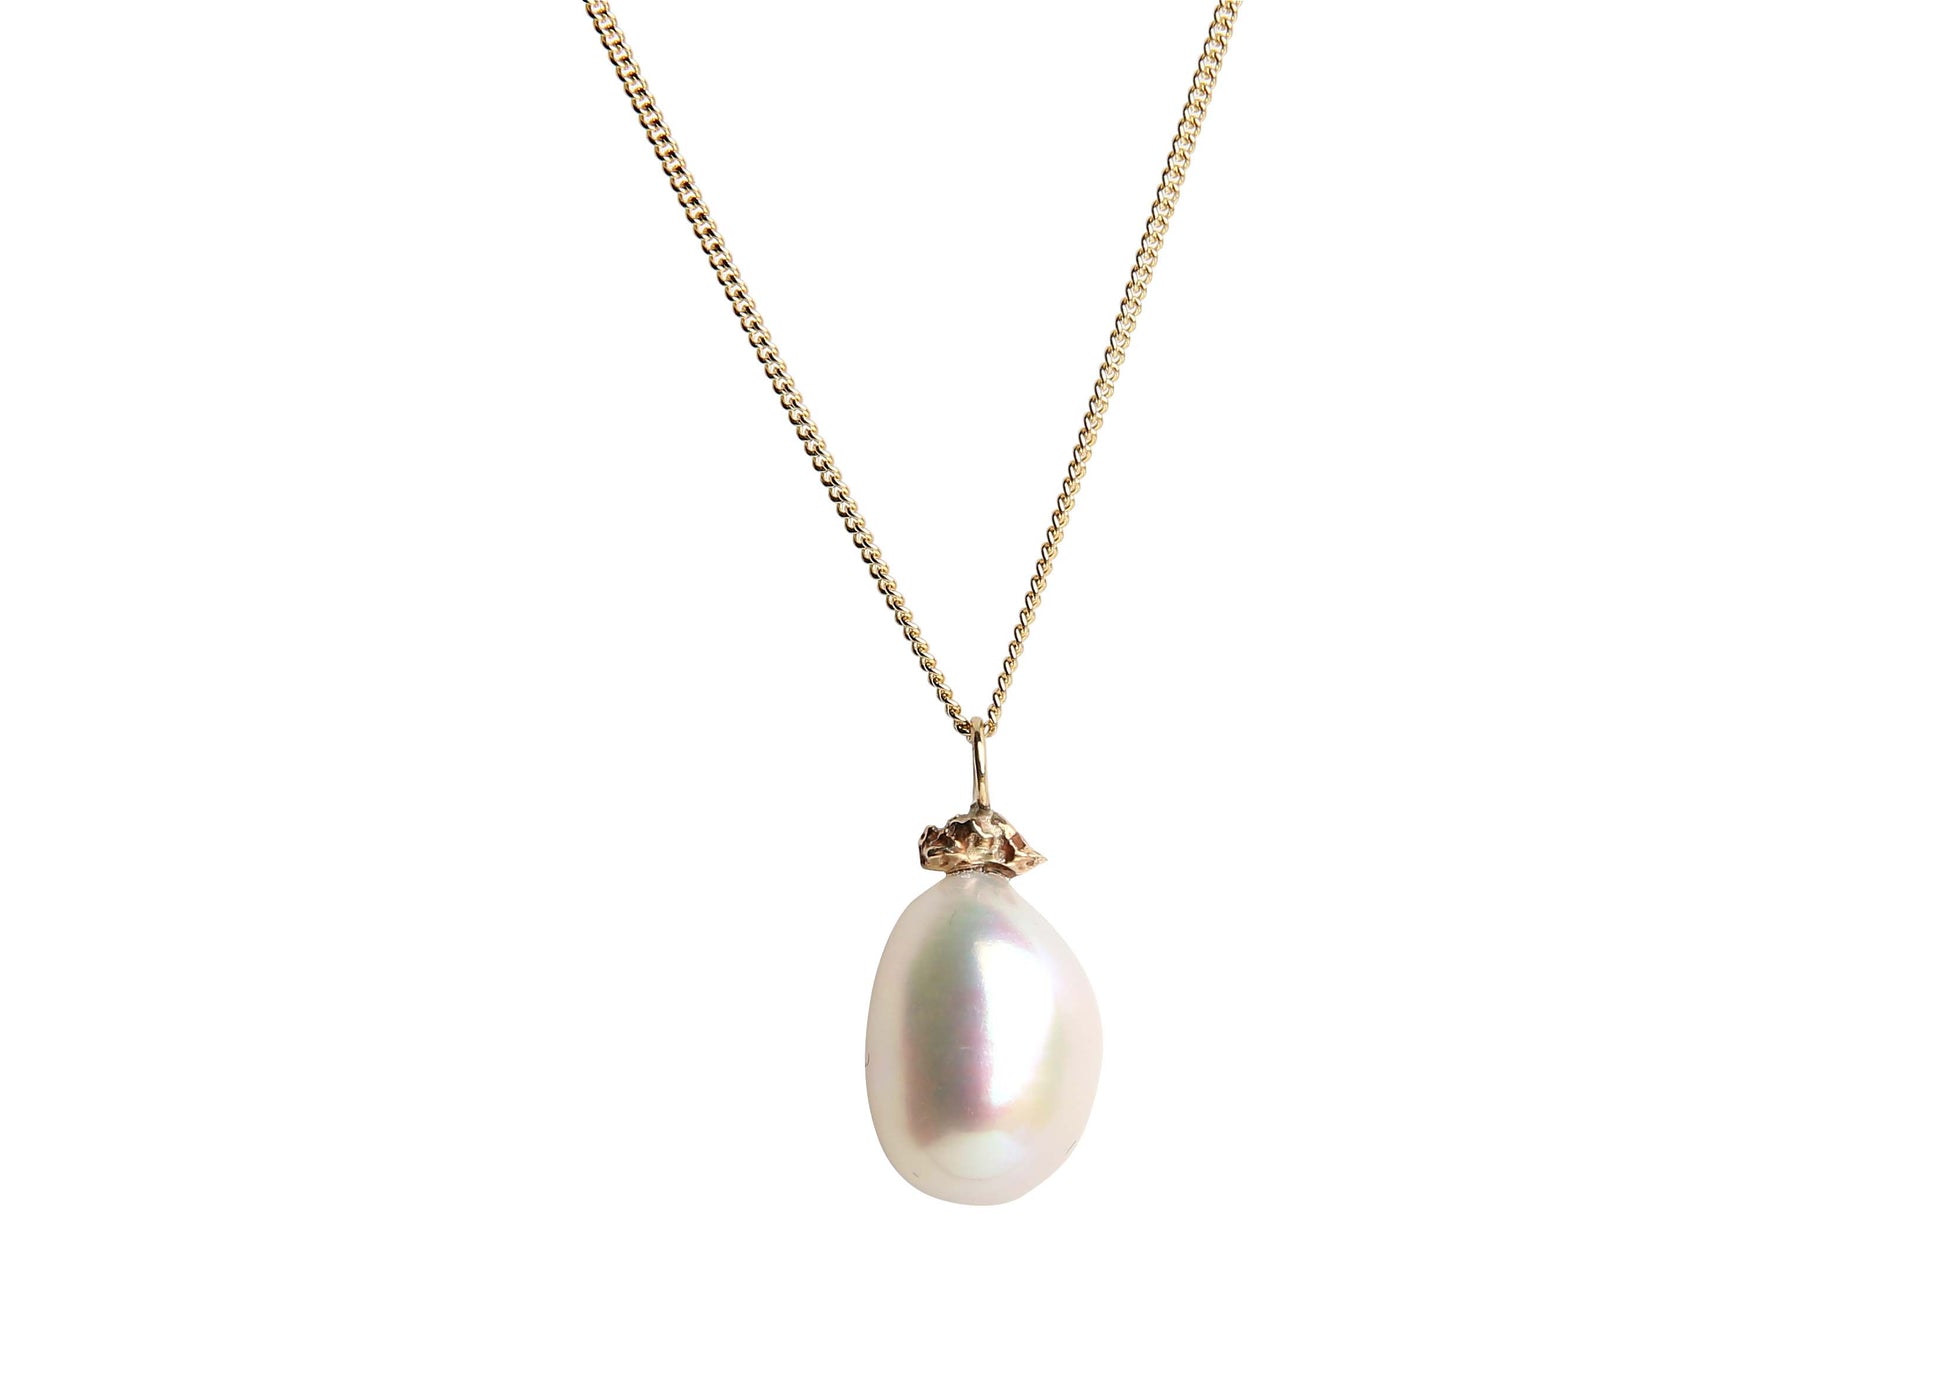 Baroque pearl and gold nugget pendant necklace